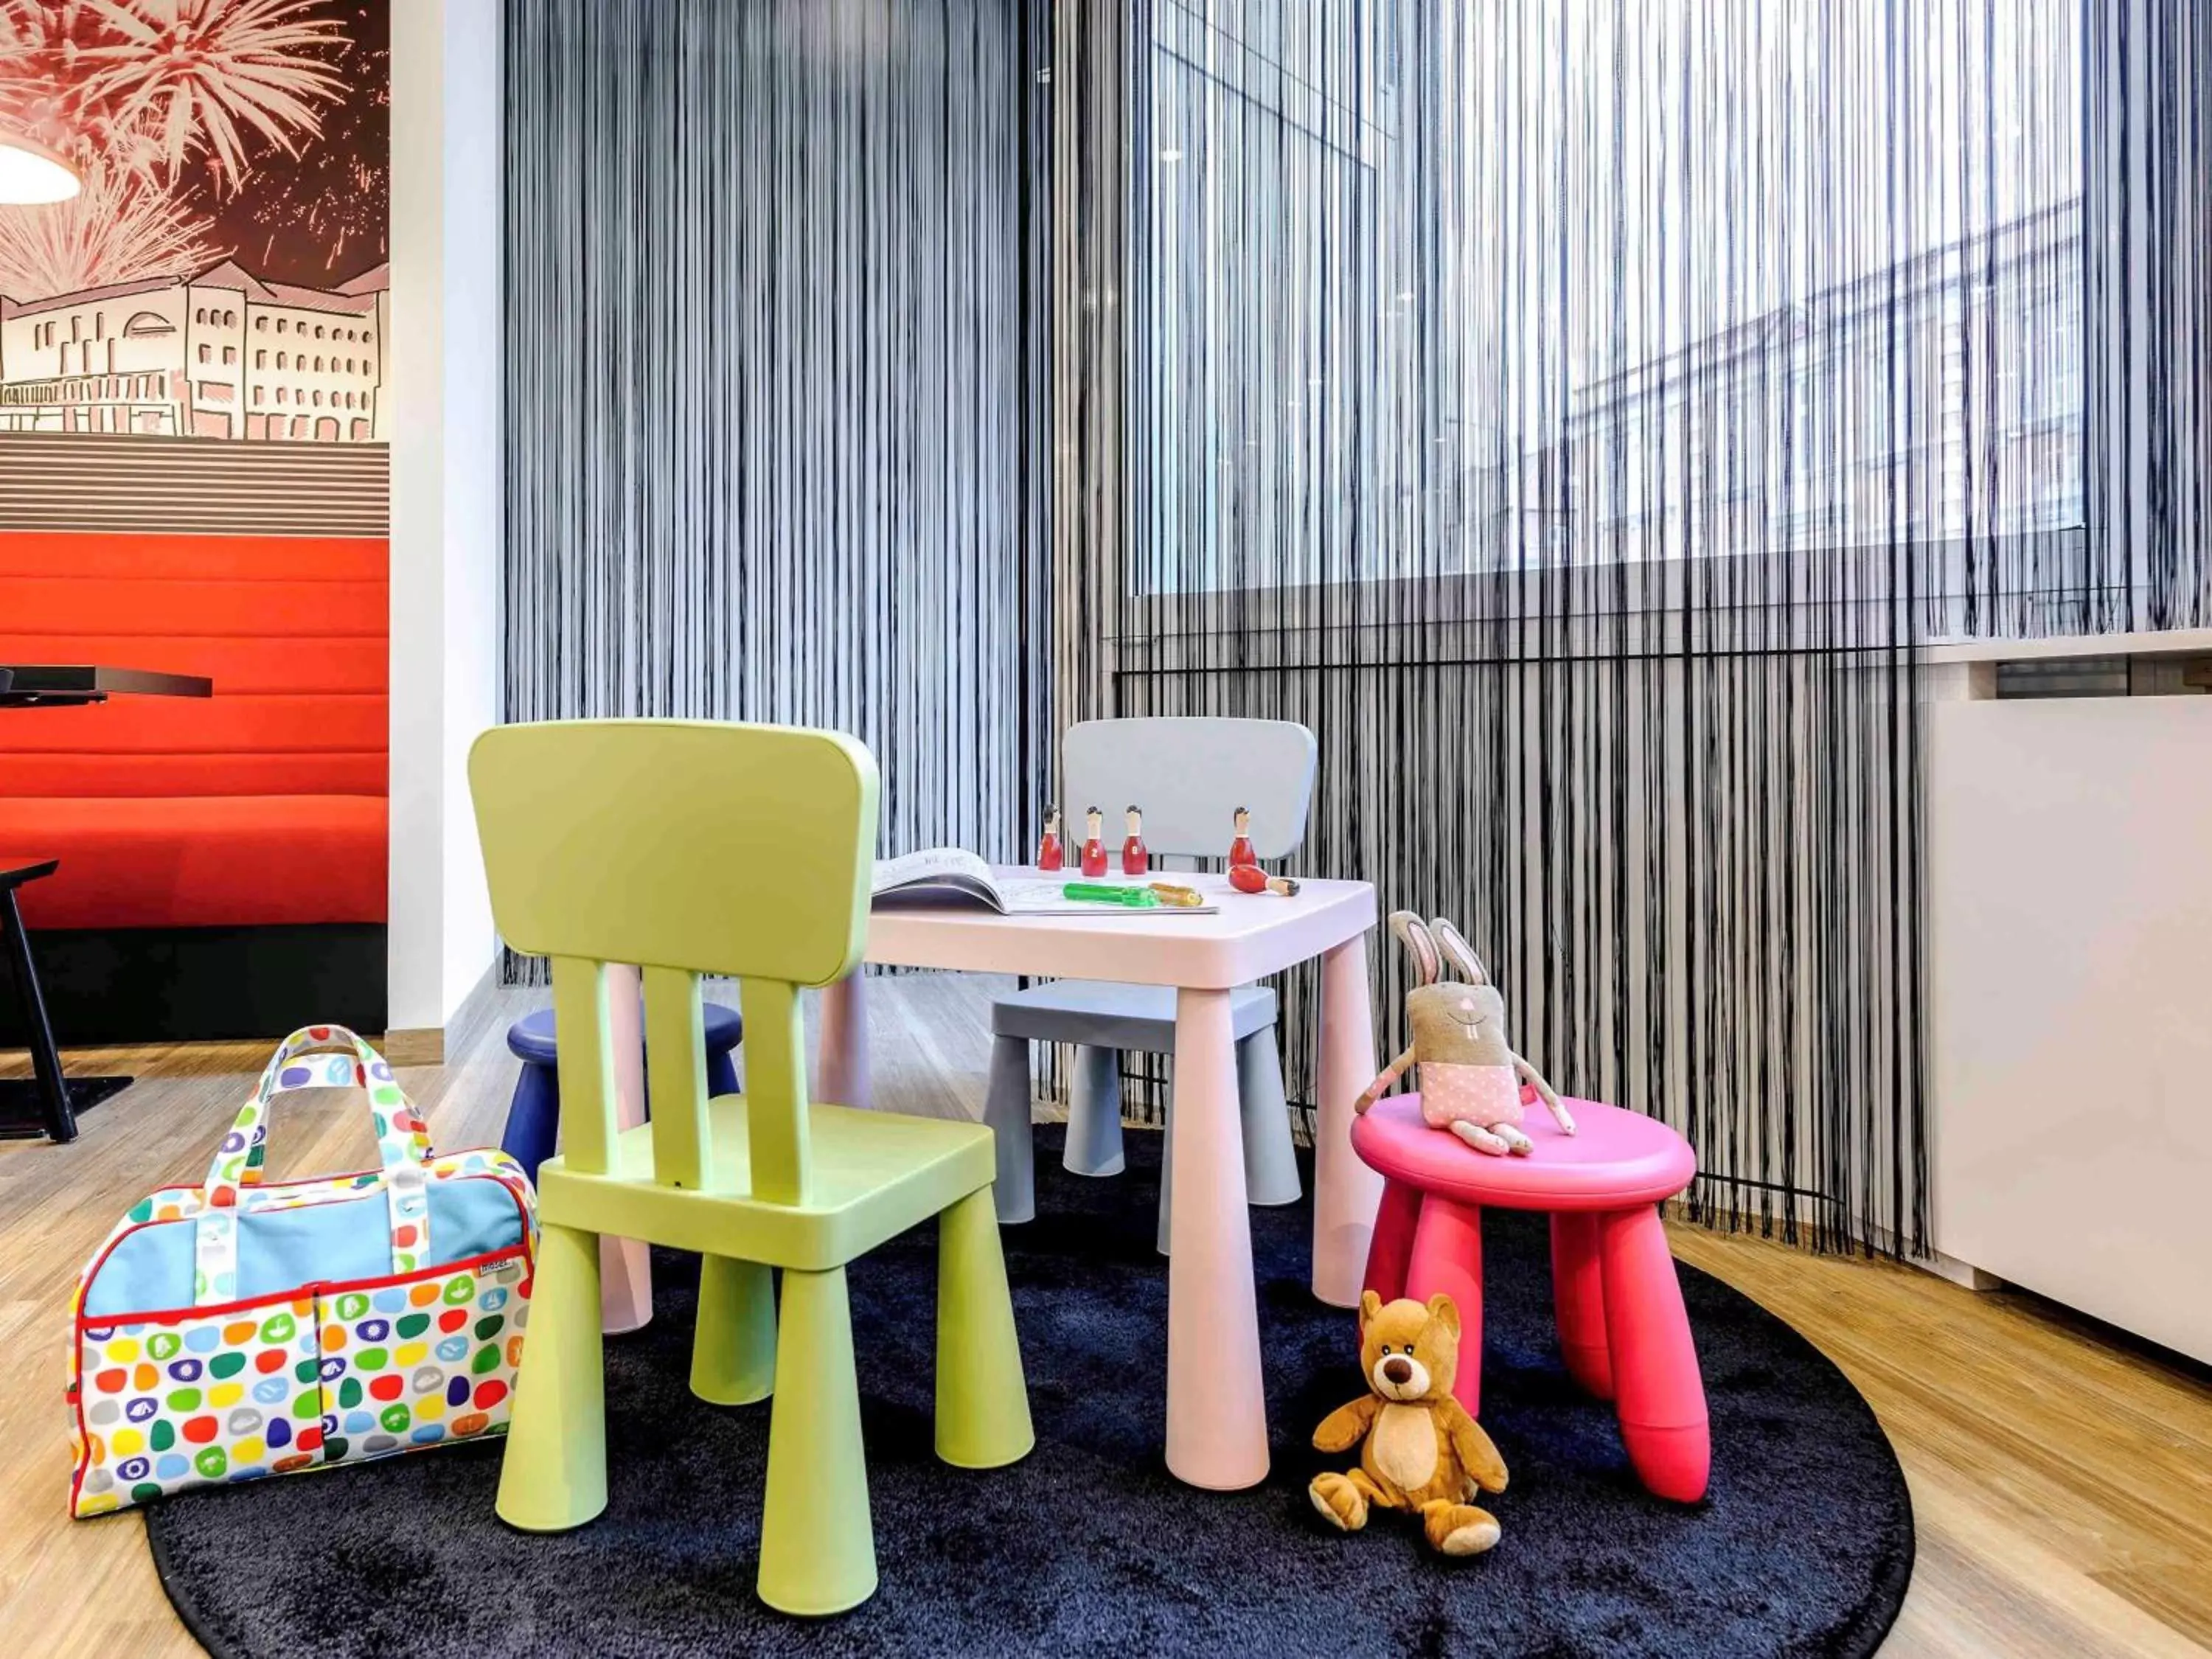 On site, Kid's Club in ibis Styles Halle